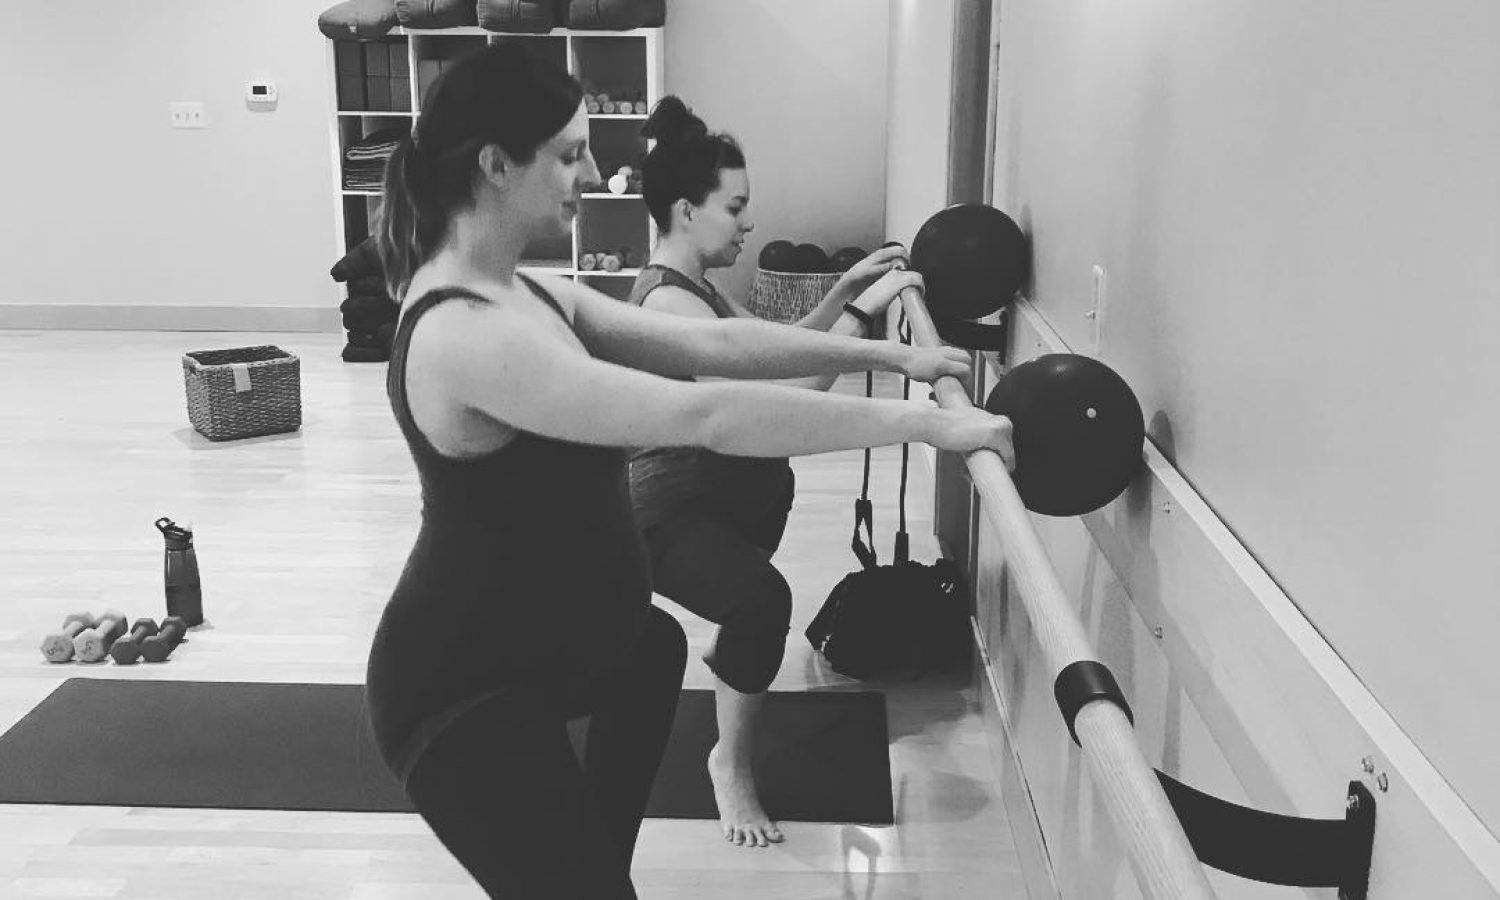 Just a couple pregnant mamas working those squats! Get it mama! #pregnant #prenatal #moms #mission #bellies #babies #community #connection #selflove #selfcare #prenatalyoga #barre #healthy #mama #momlife